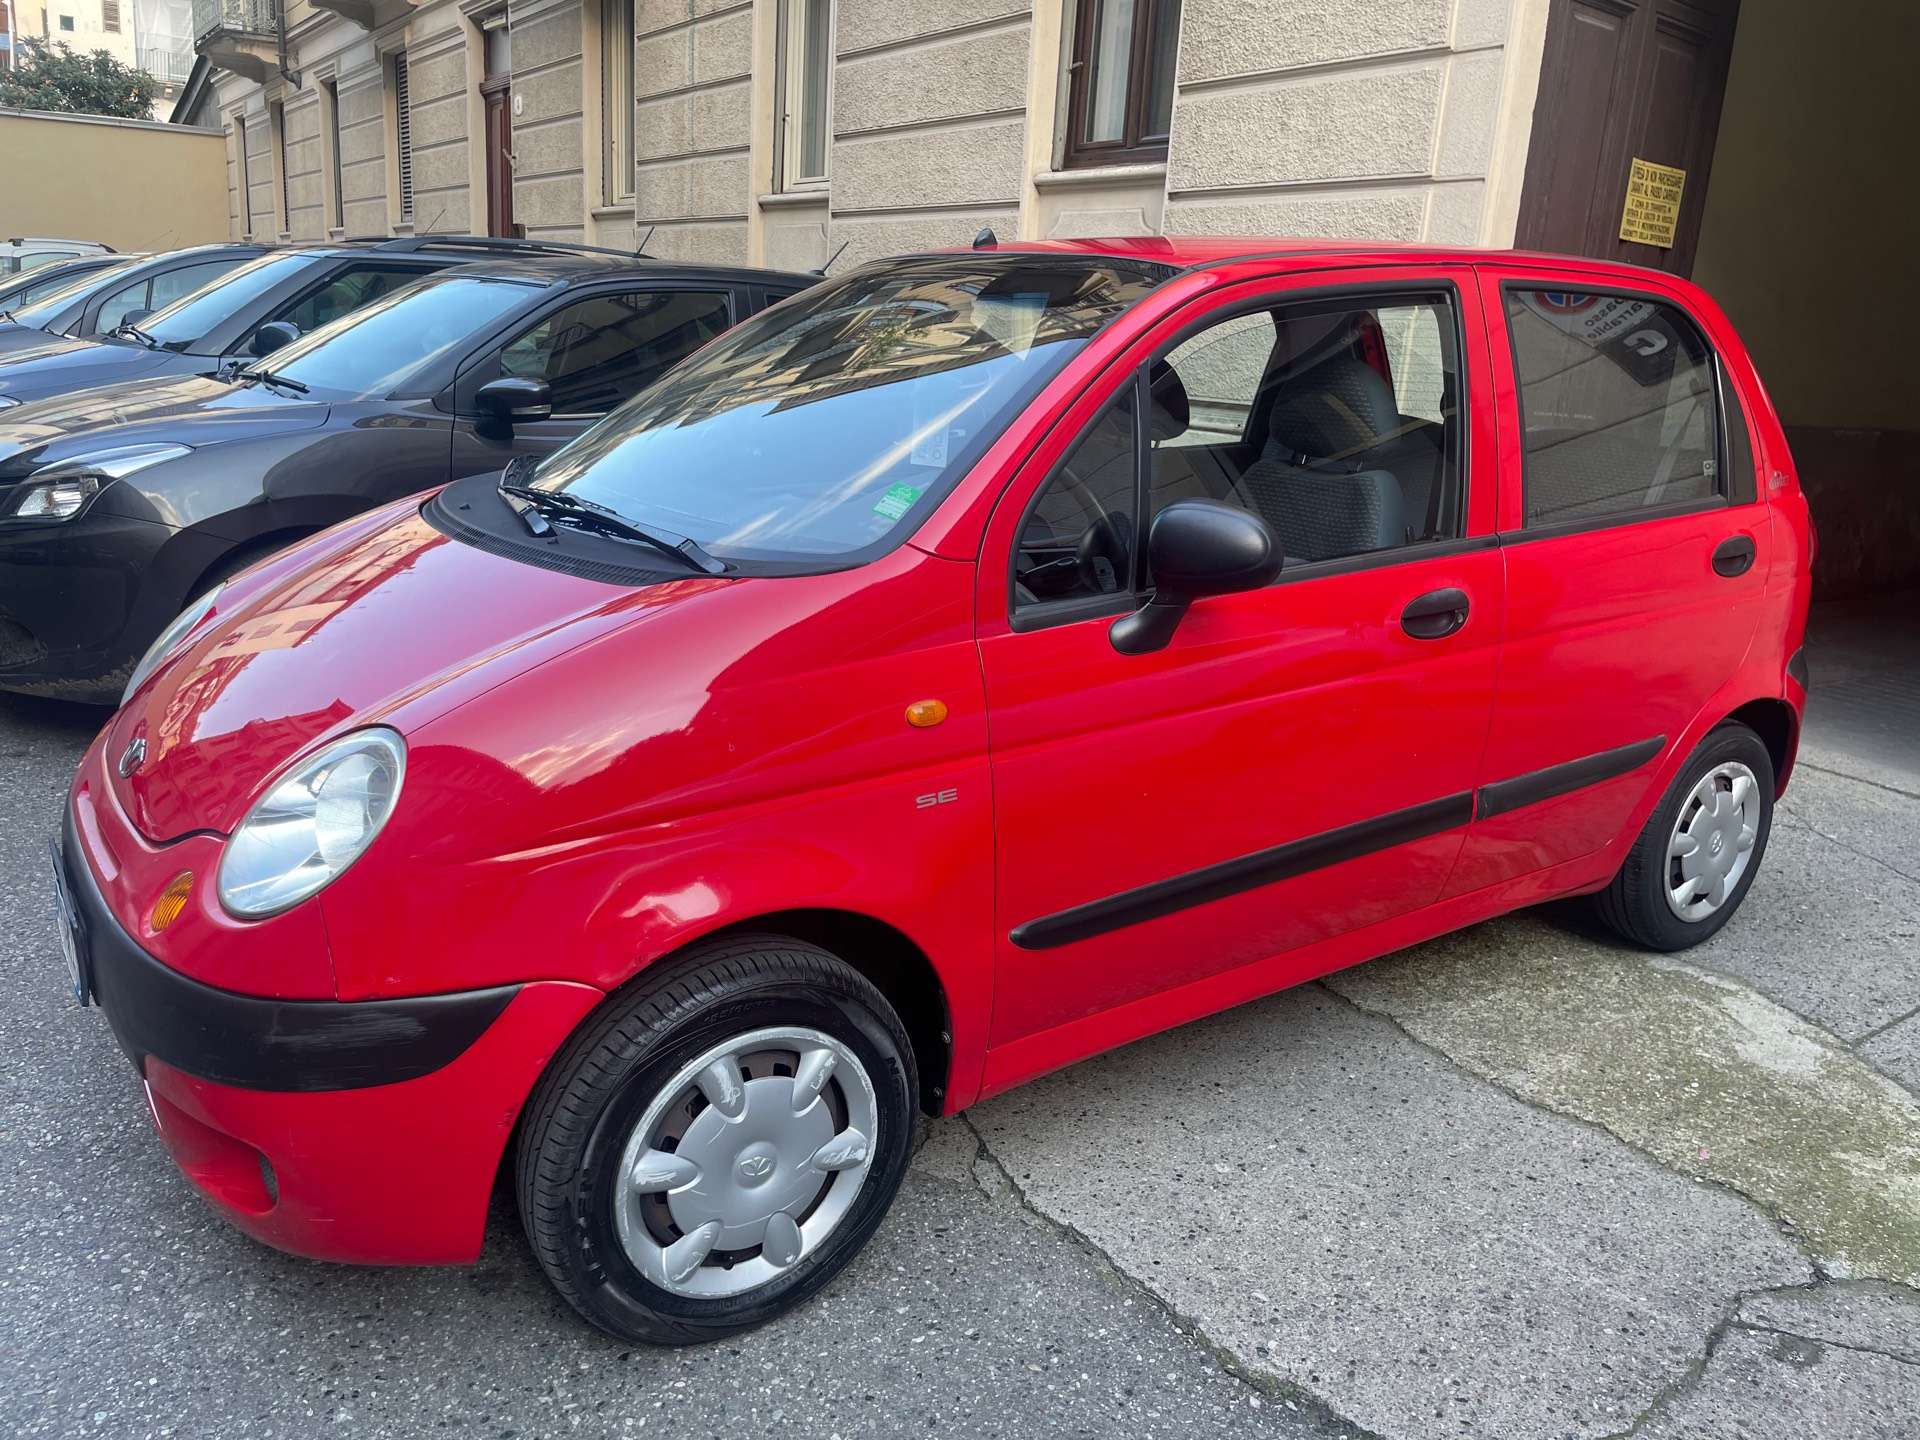 Daewoo Matiz Other in Red used in San Mauro Torinese - Torino - TO for € 2,700.-